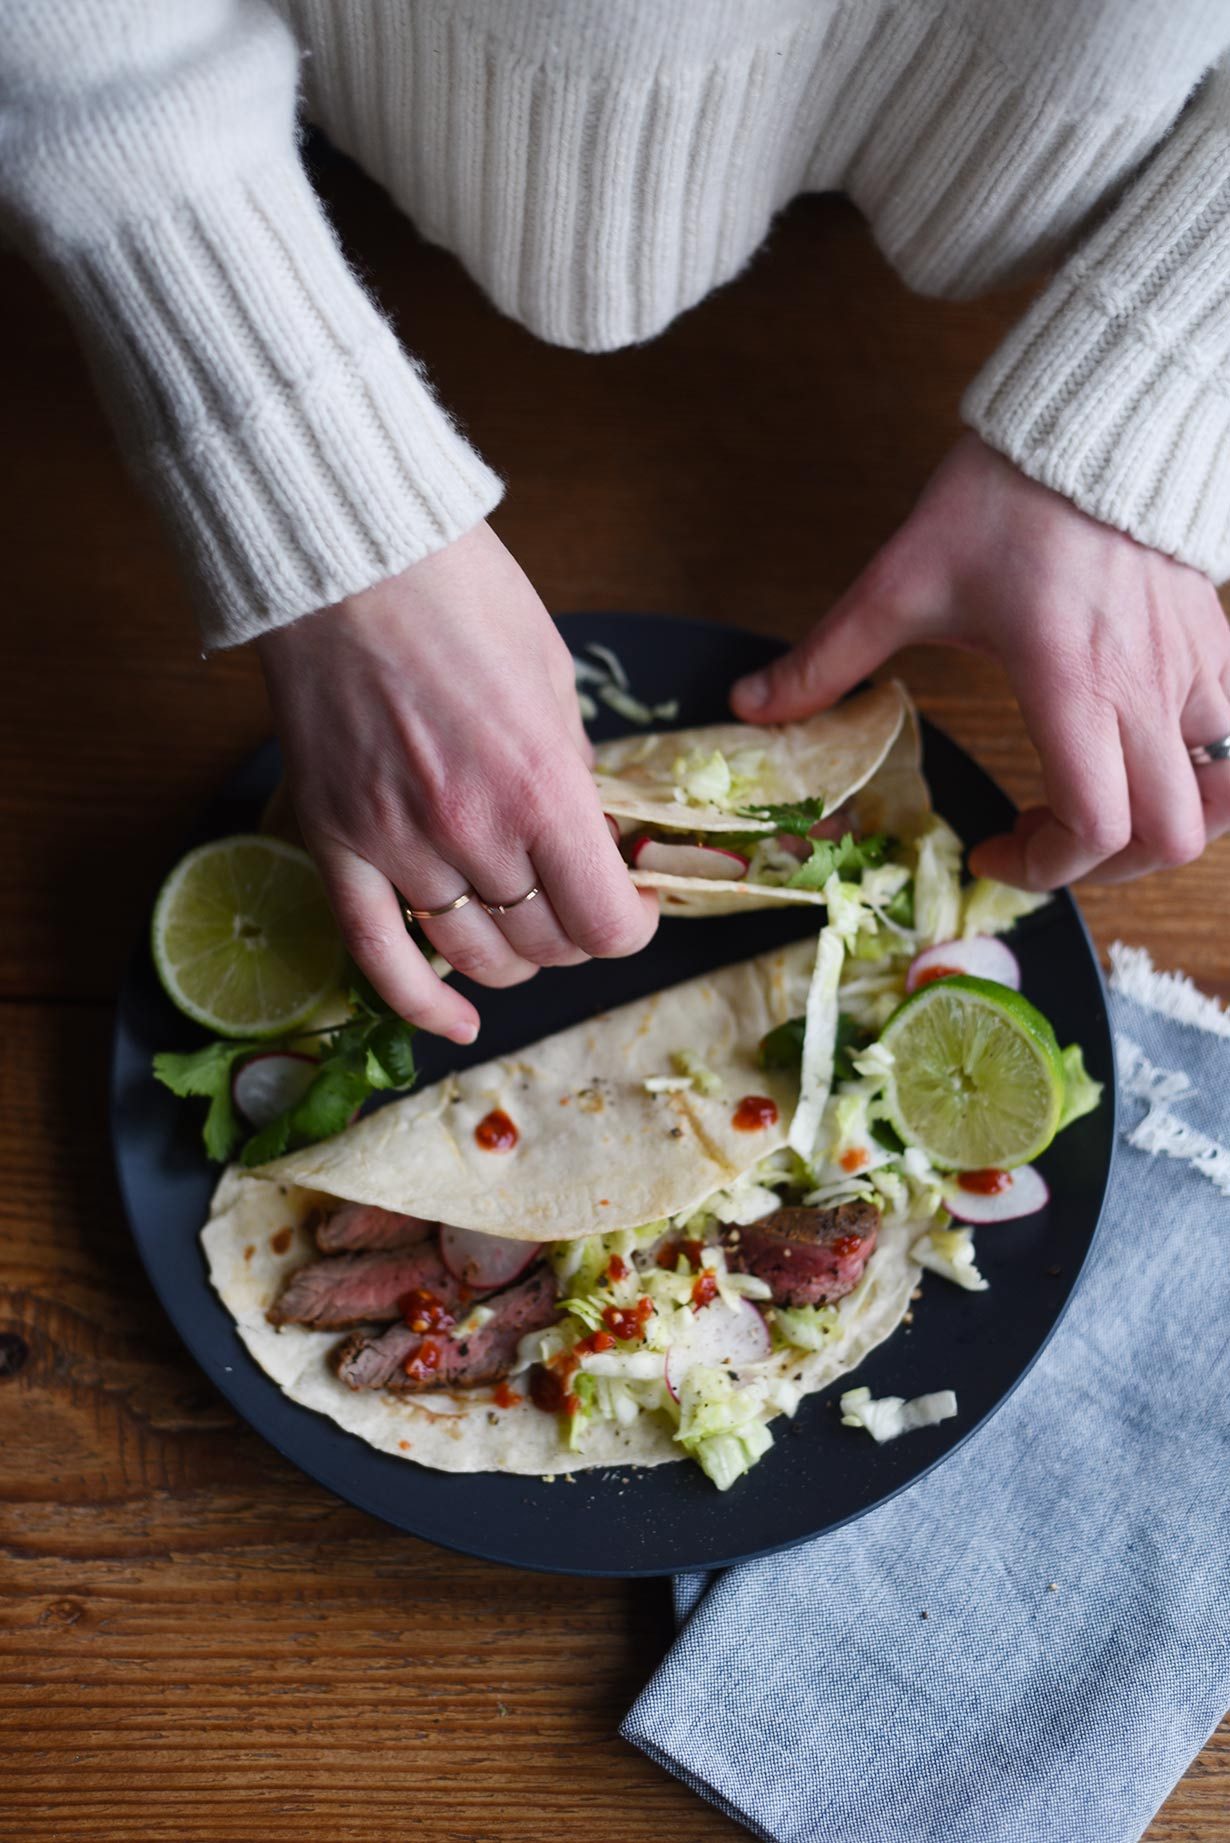 Turntable Kitchen shares an easy recipe for Coffee-Rubbed Steak Tacos